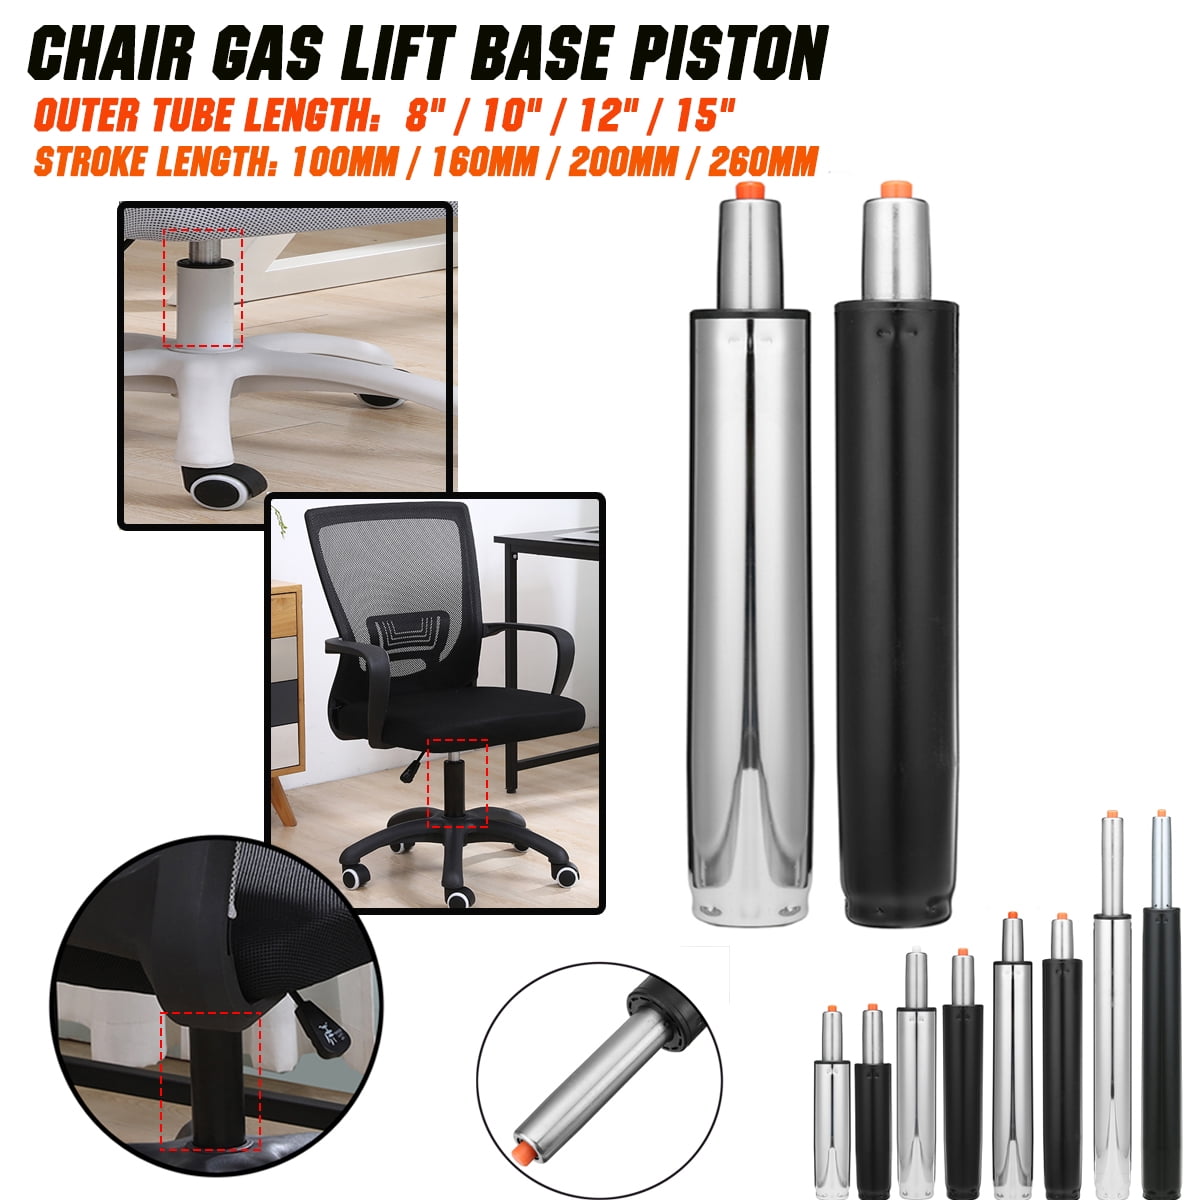 10" 12" 15" REPLACEMENT GAS LIFT BAR STOOL OFFICE CHAIR ADJUSTABLE SEAT PISTON 